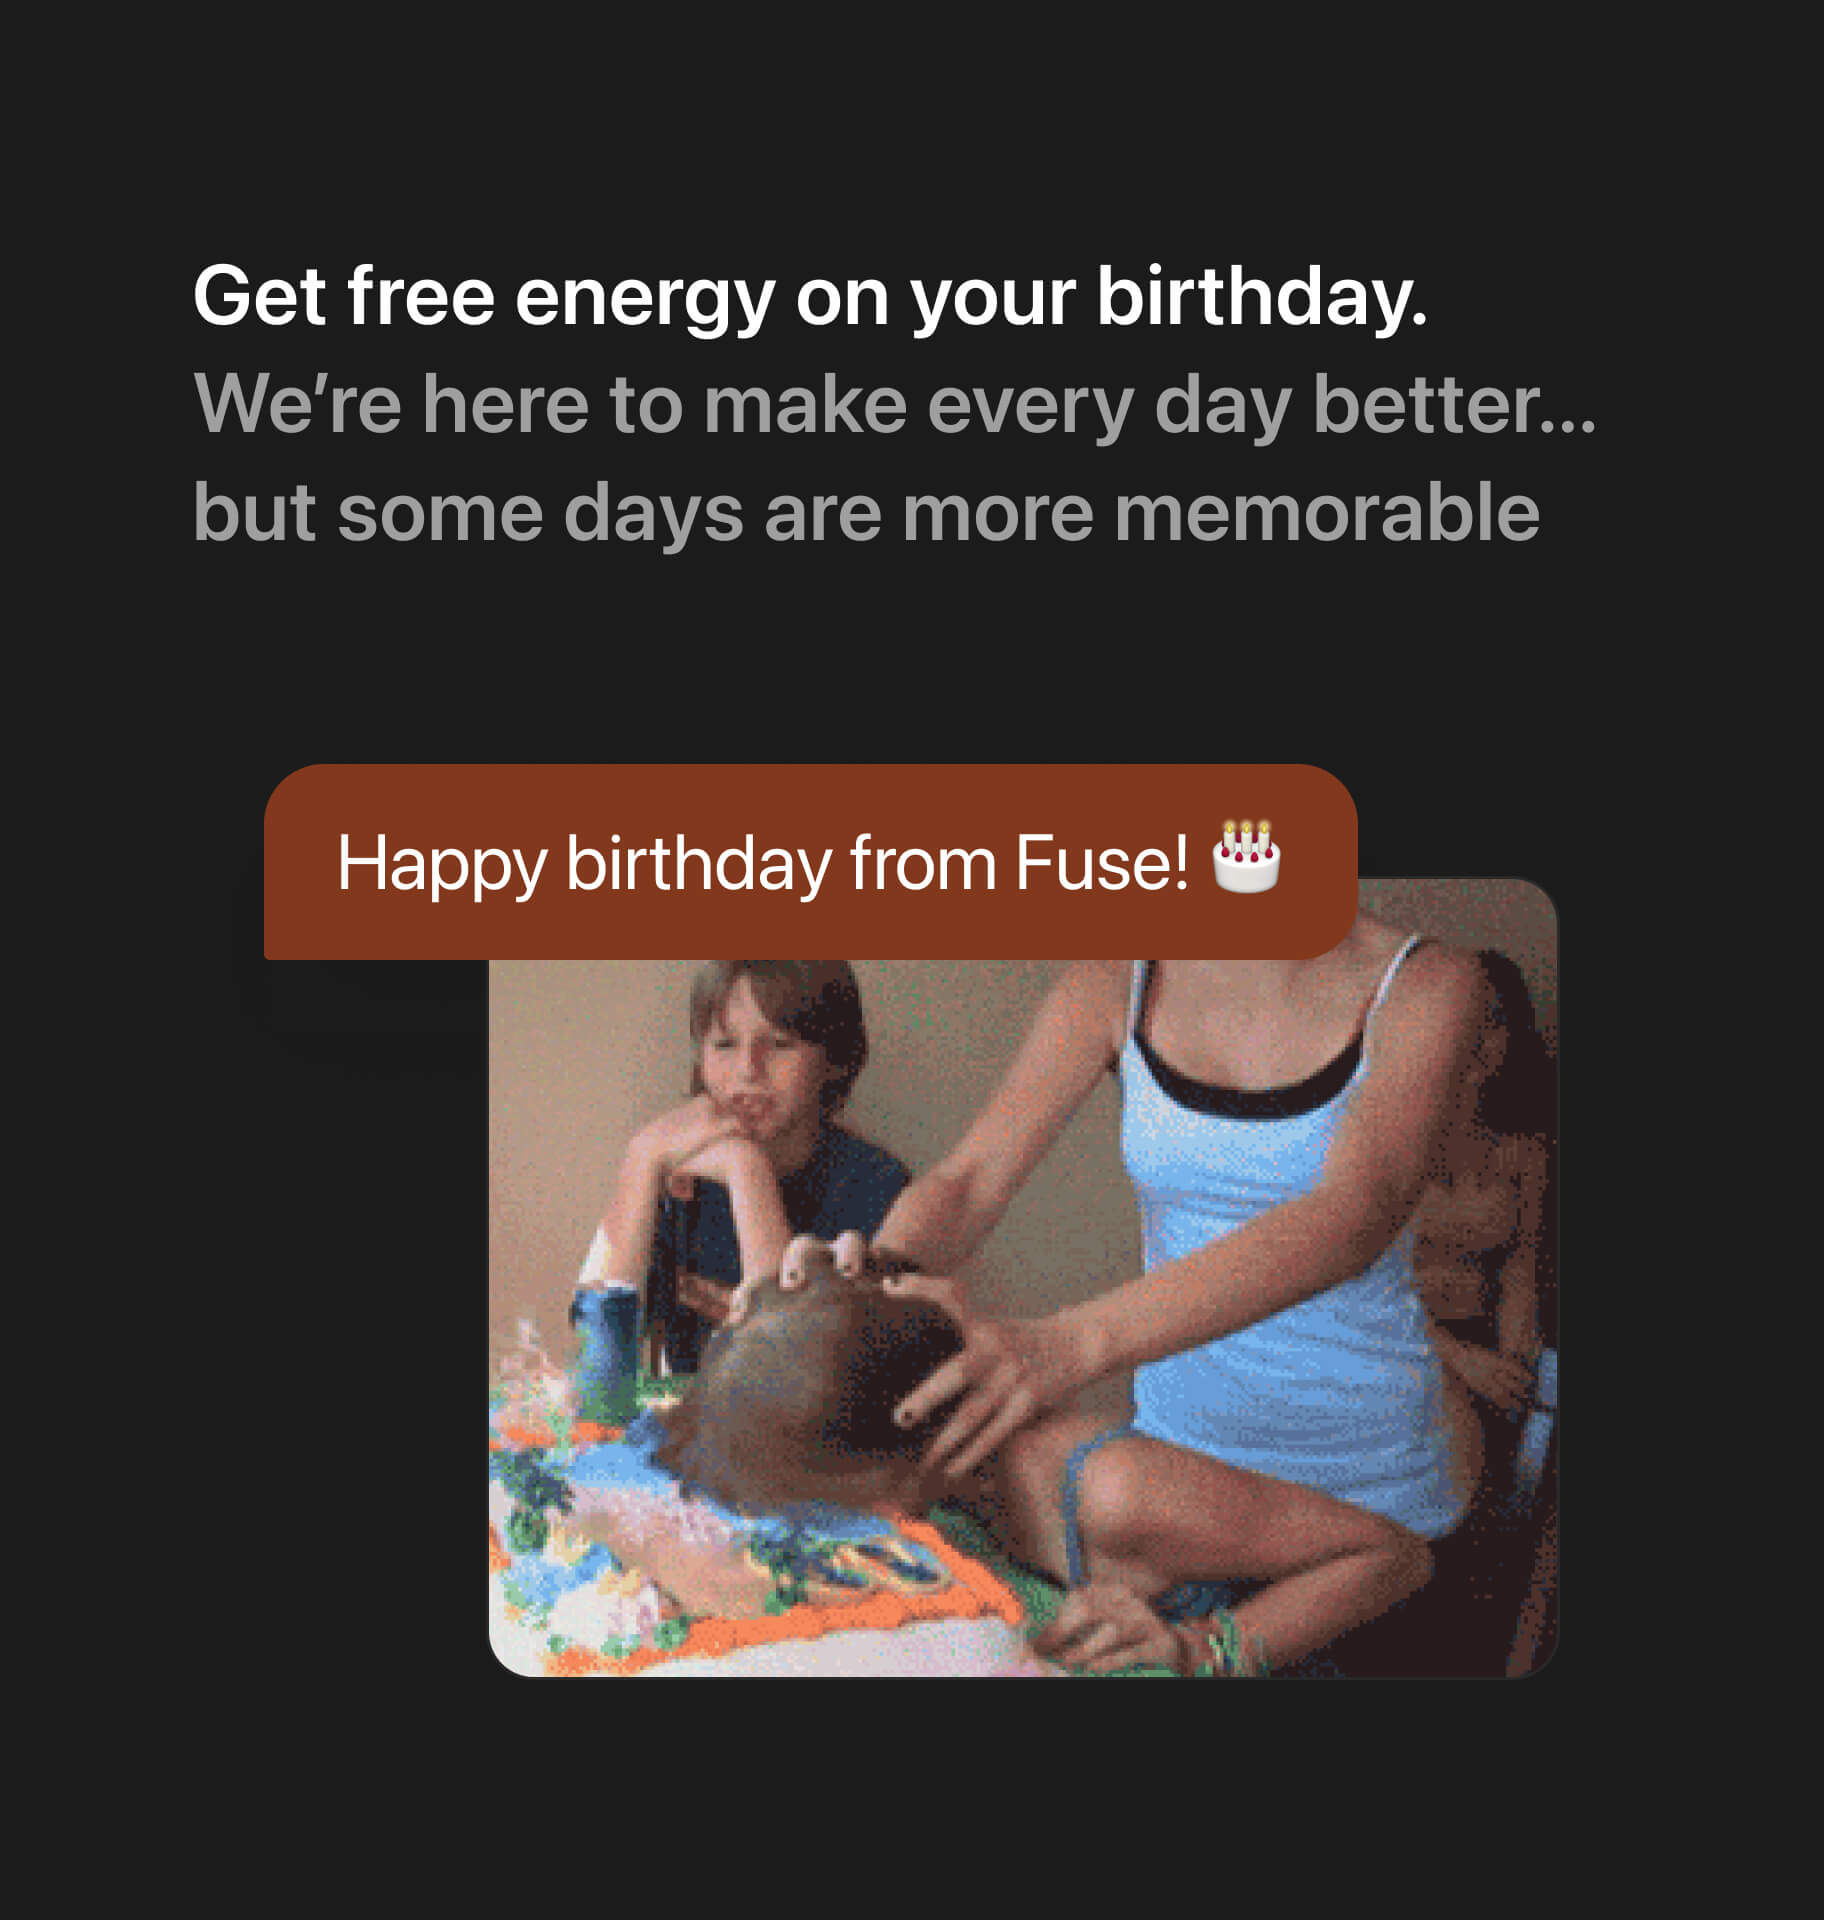 Get free electricity on your birthday. We’re here to make every day better... but some days are more memorable